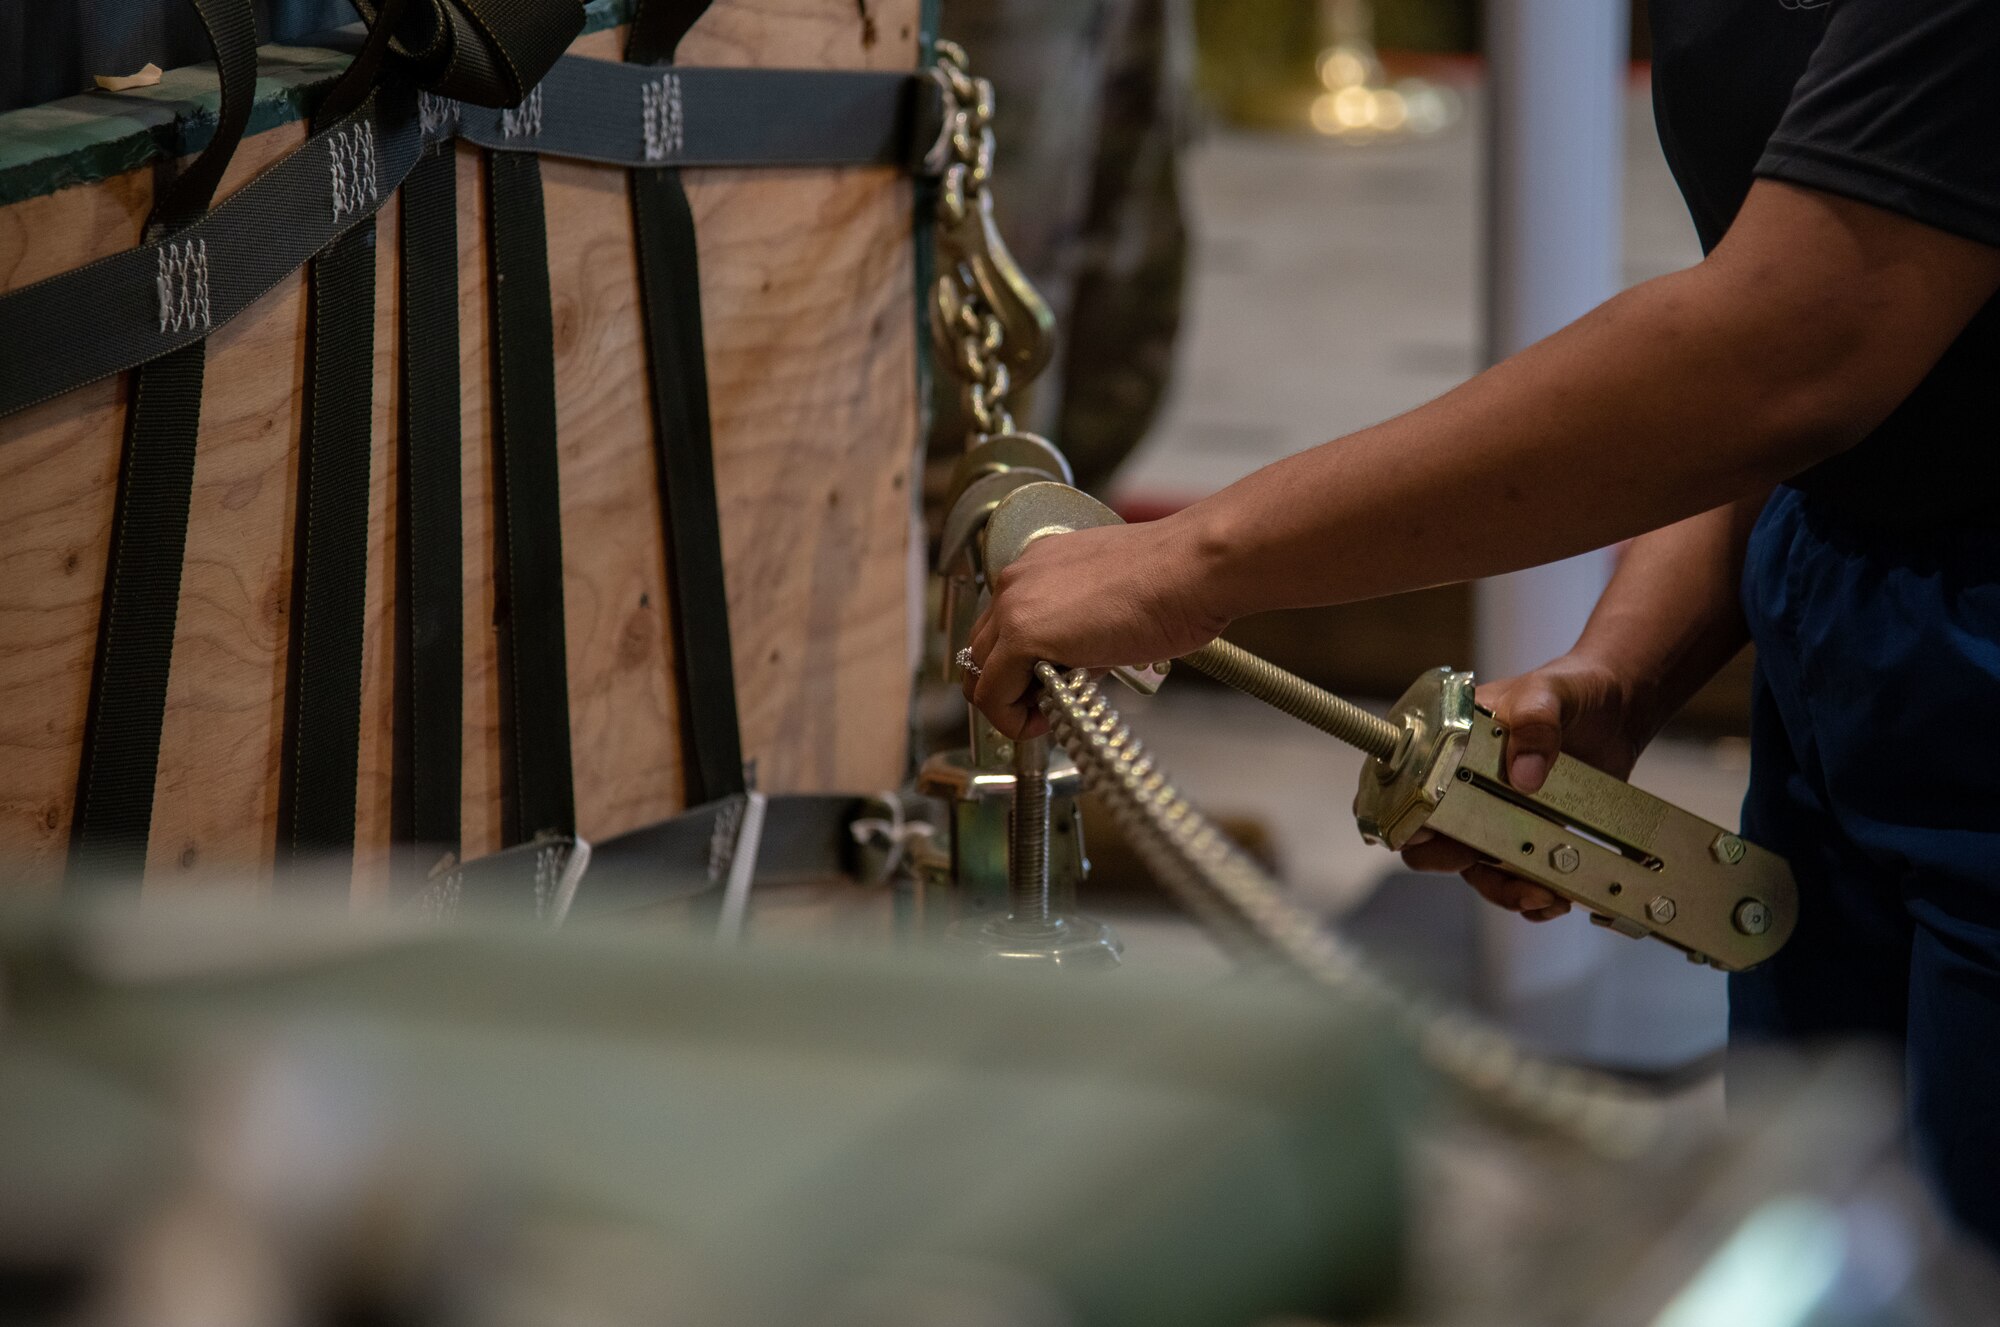 Senior Airman Jasmine Jordan of the 41st Aerial Port Squadron at Keesler Air Force Base, Miss., attaches a WHAT to a chain, represent one of 12 members of the air transportation community who lost their life in 2020, during a memorial event June 5, 2021. Jordan was one of the Reserve Citizen Airmen who helped organize the first annual (for the 41st) “Port Dawg Memorial Run” here. (U.S. Air Force Photo by Staff Sgt. Kristen Pittman)